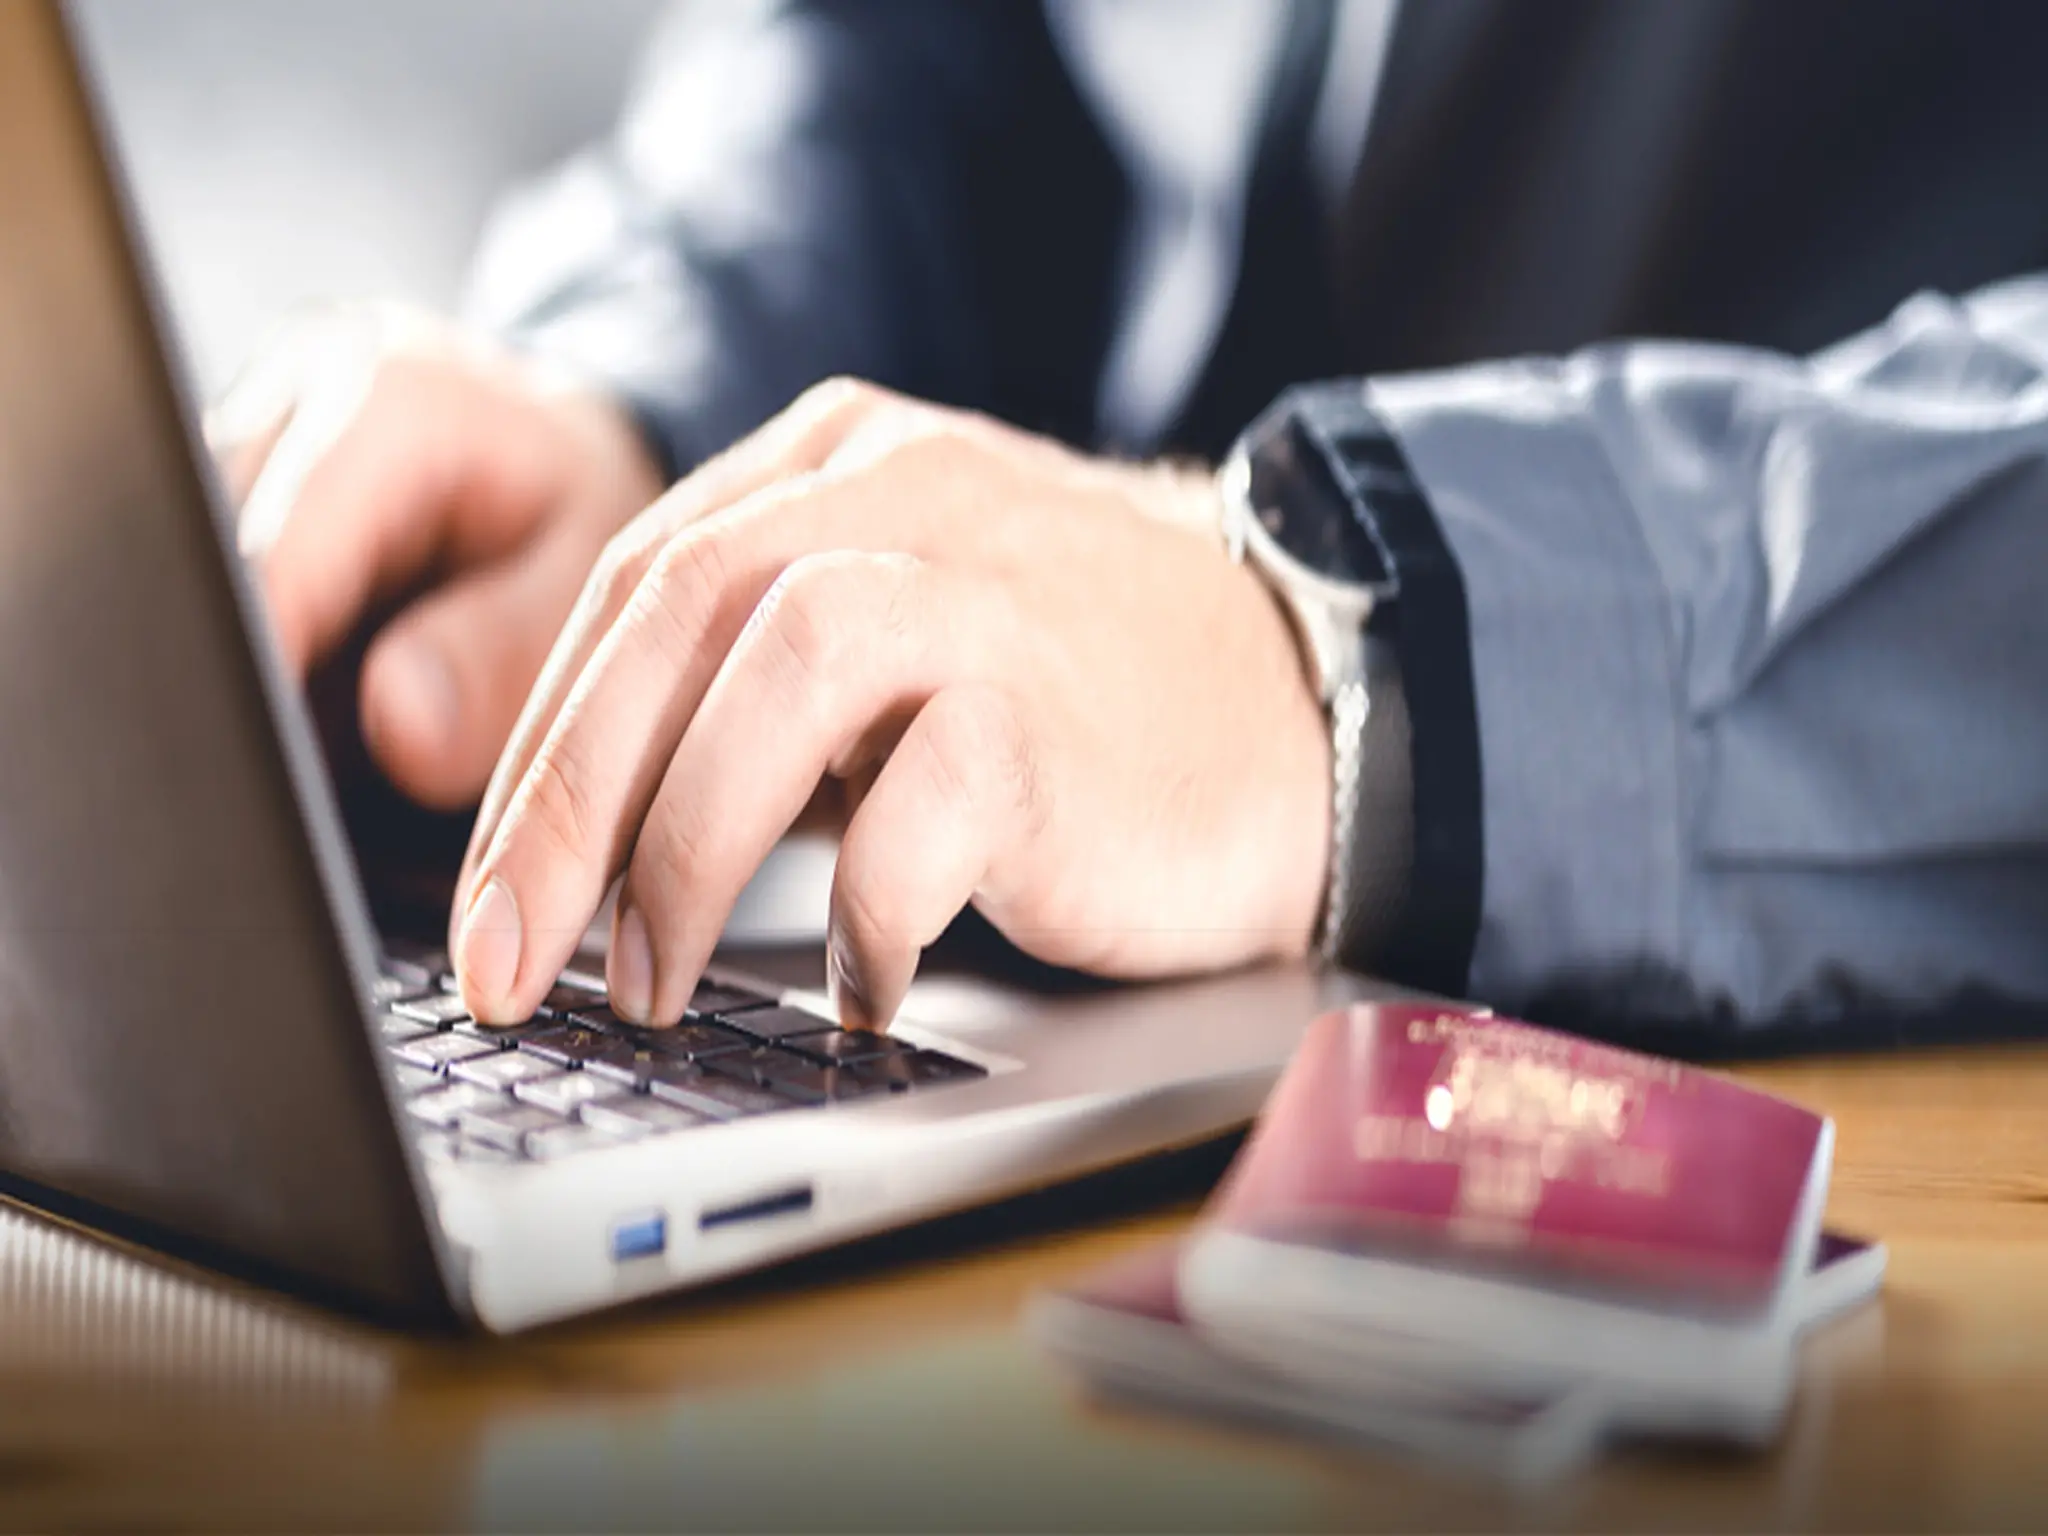 4 conditions for foreigners to obtain a "virtual work" residence visa in the UAE